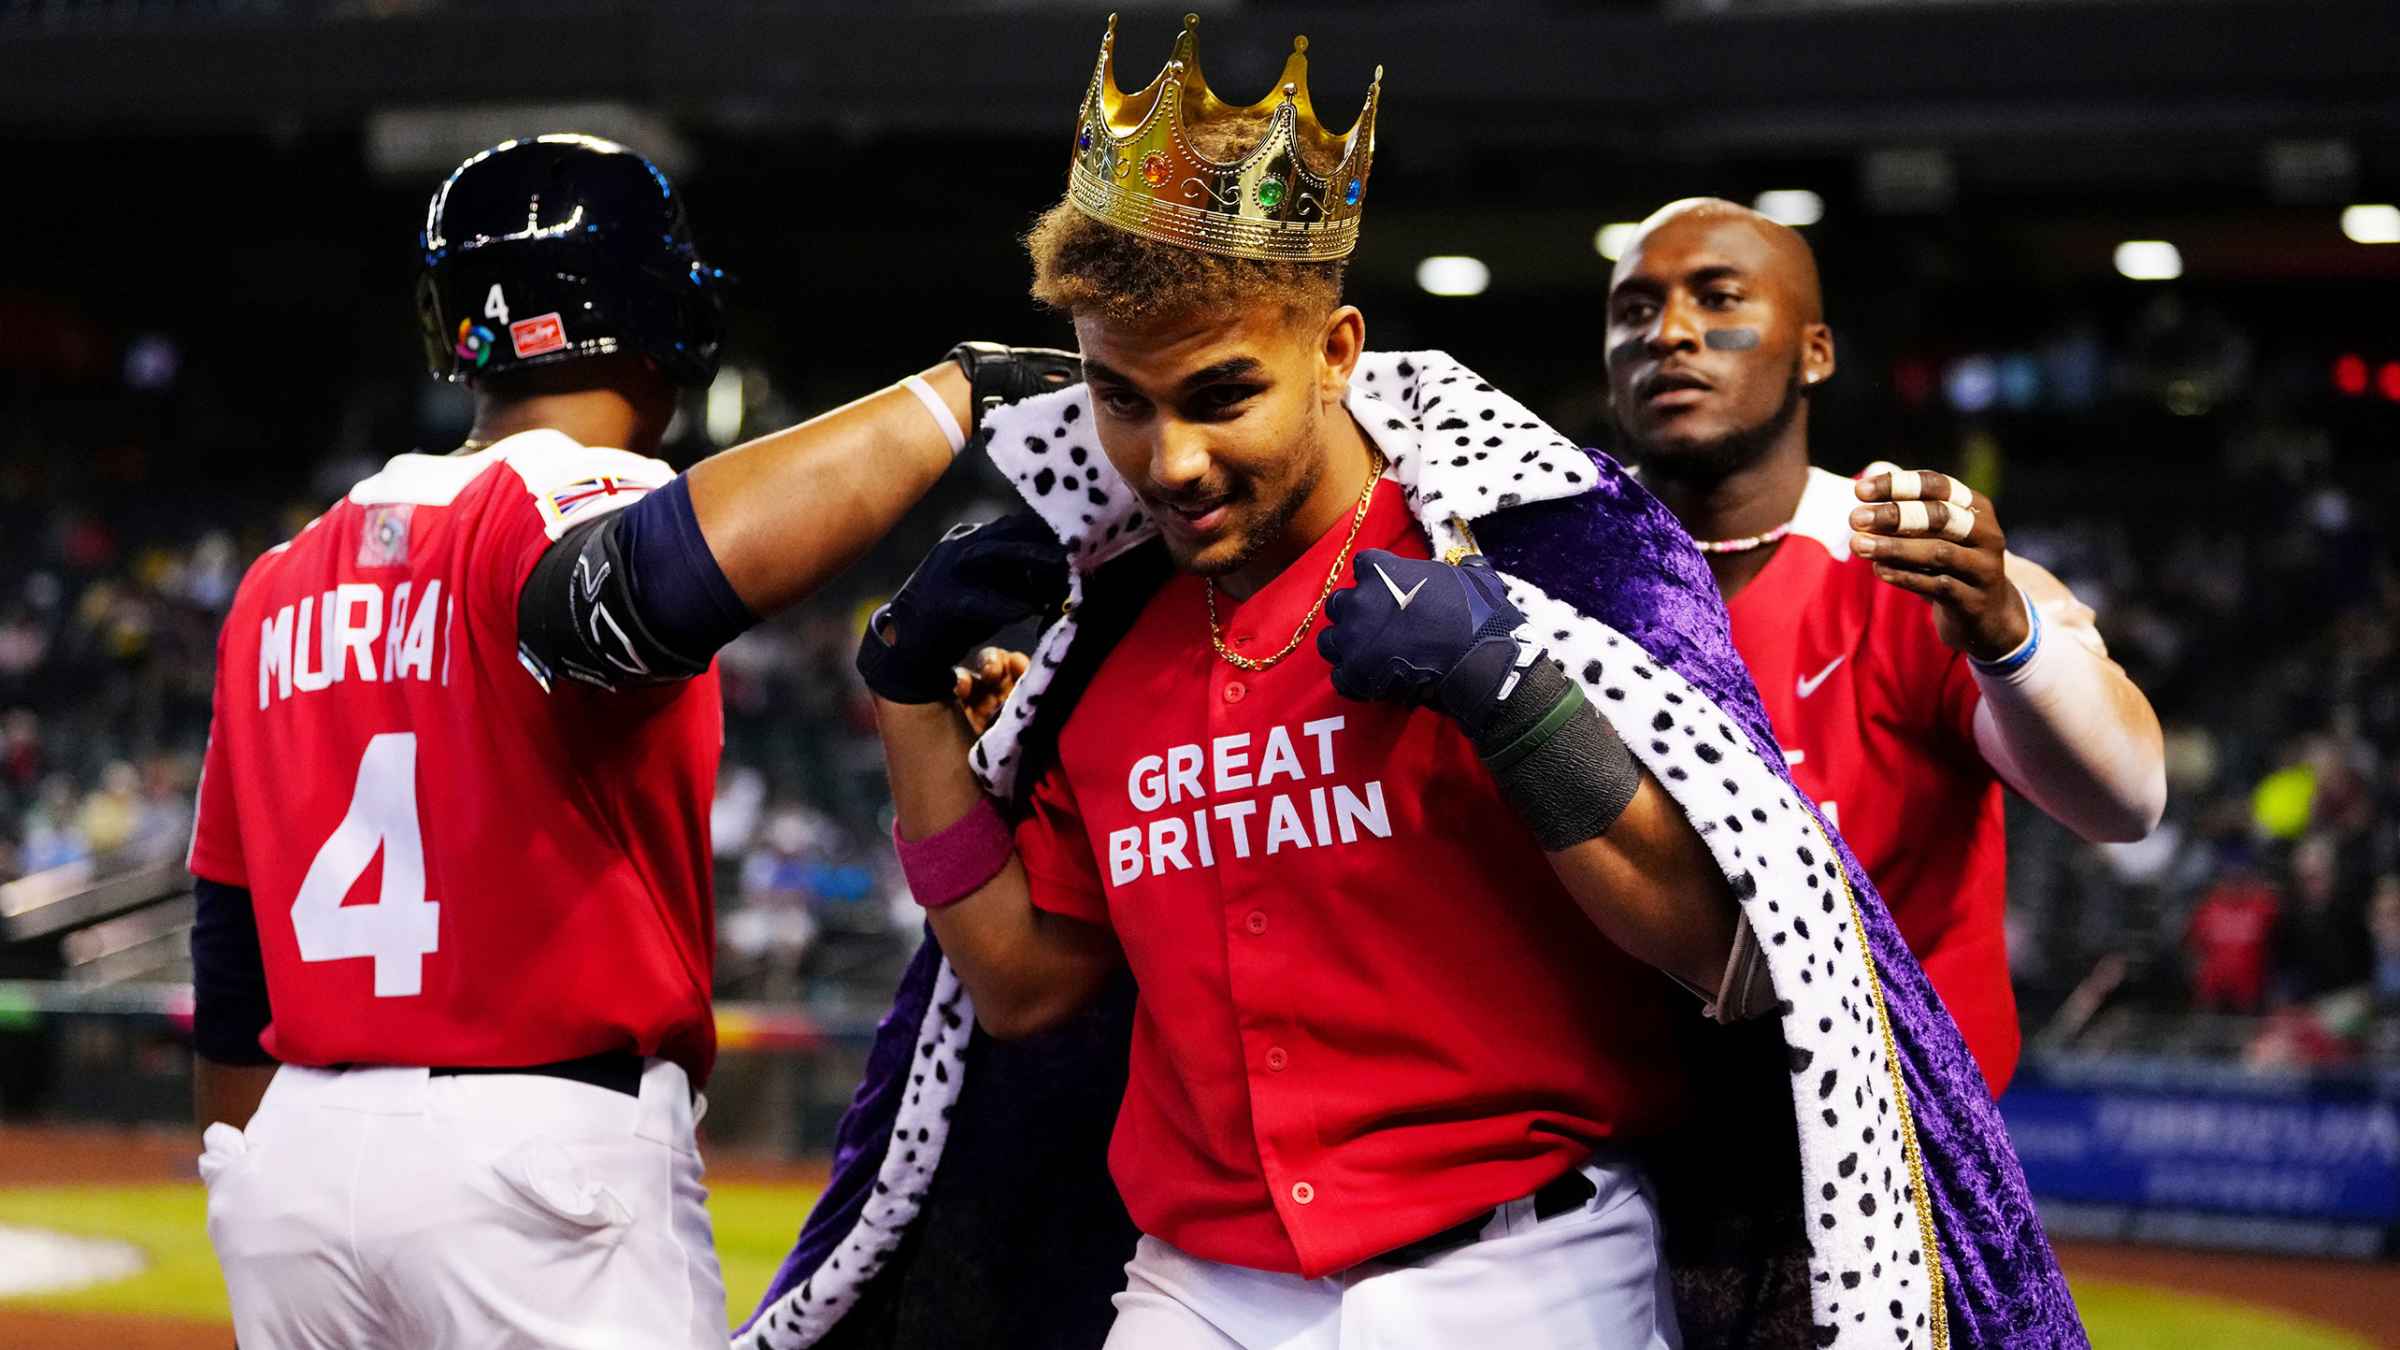 MLB Gameday: Colombia 5, Great Britain 7 Final Score (03/13/2023)